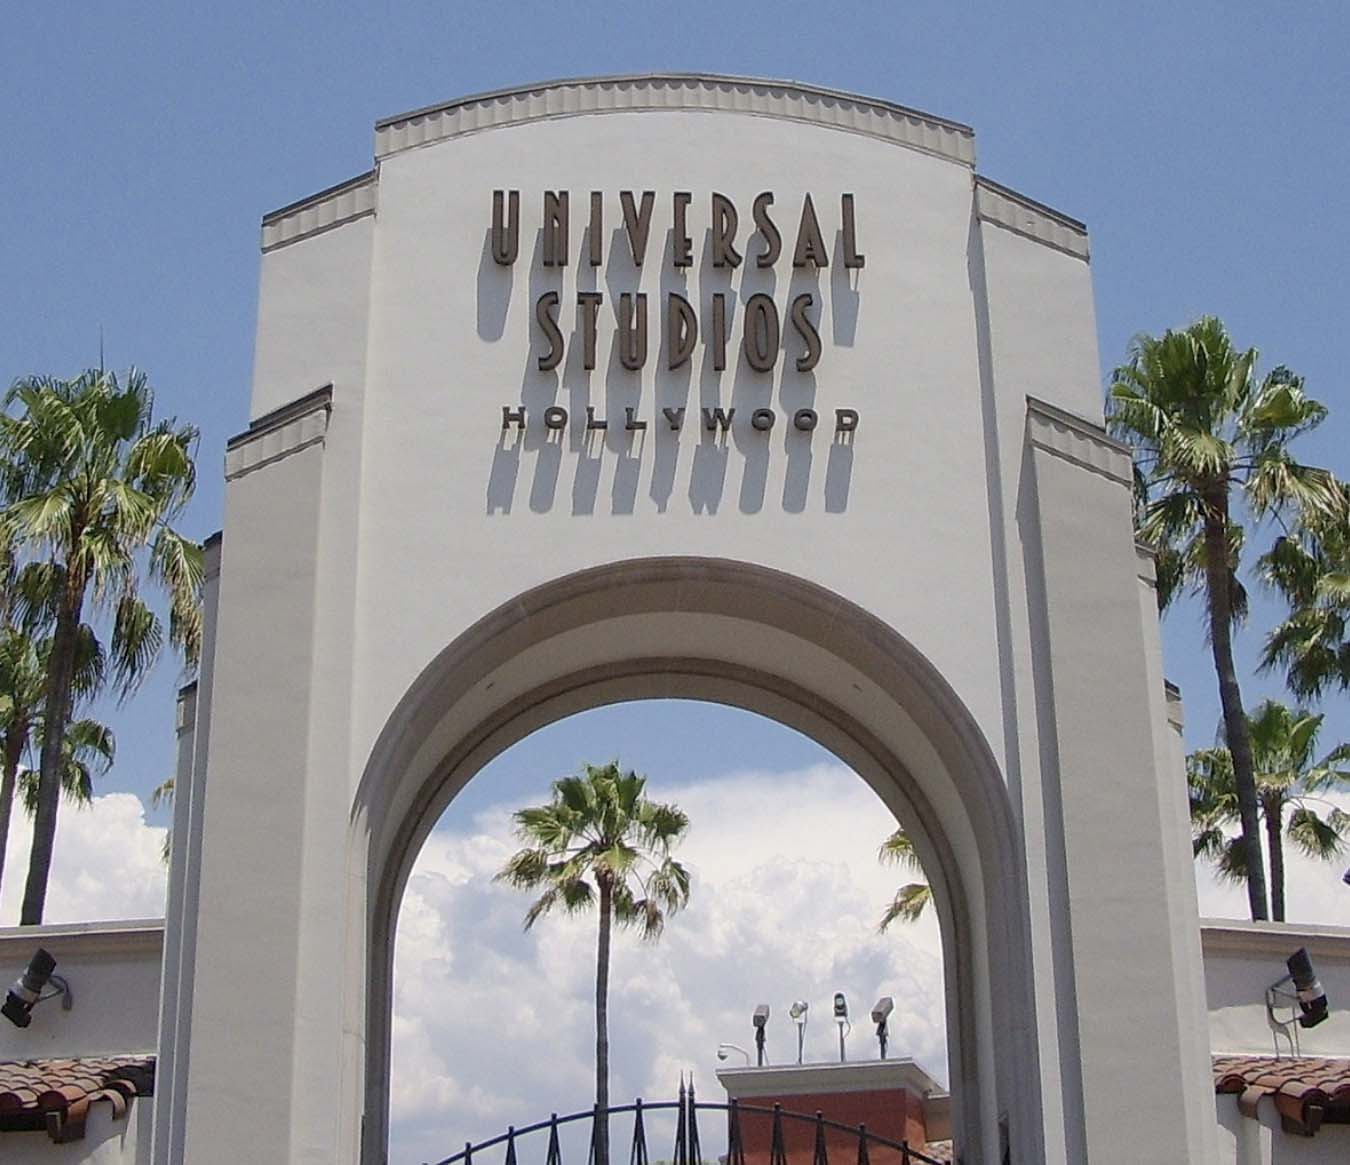 Things to Do in Los Angeles - Universal Studios Hollywood